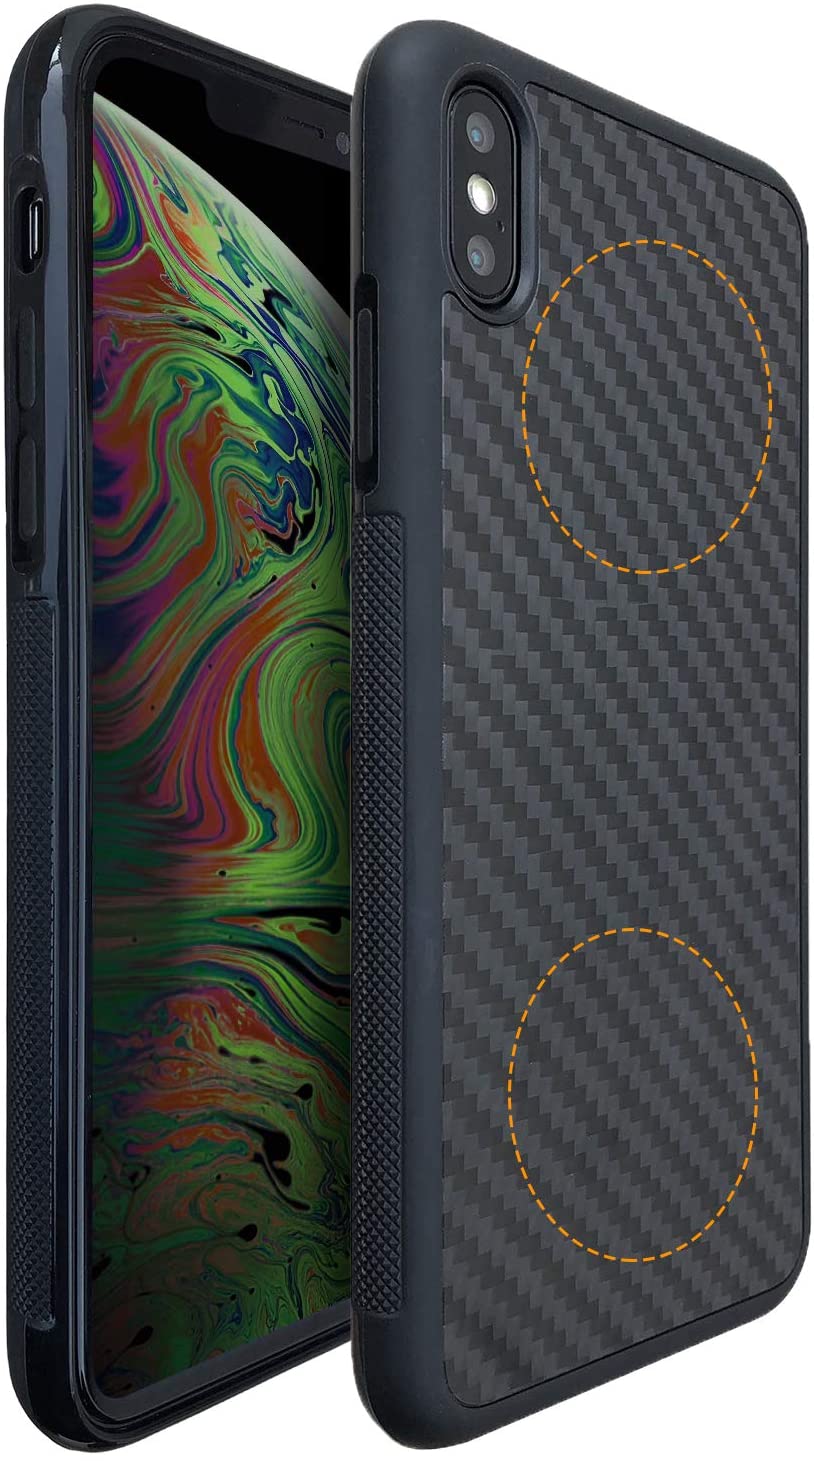 Molzar Grip Series iPhone Xs Max  with Real Forged Case - Molzar-iphone cases and accessories